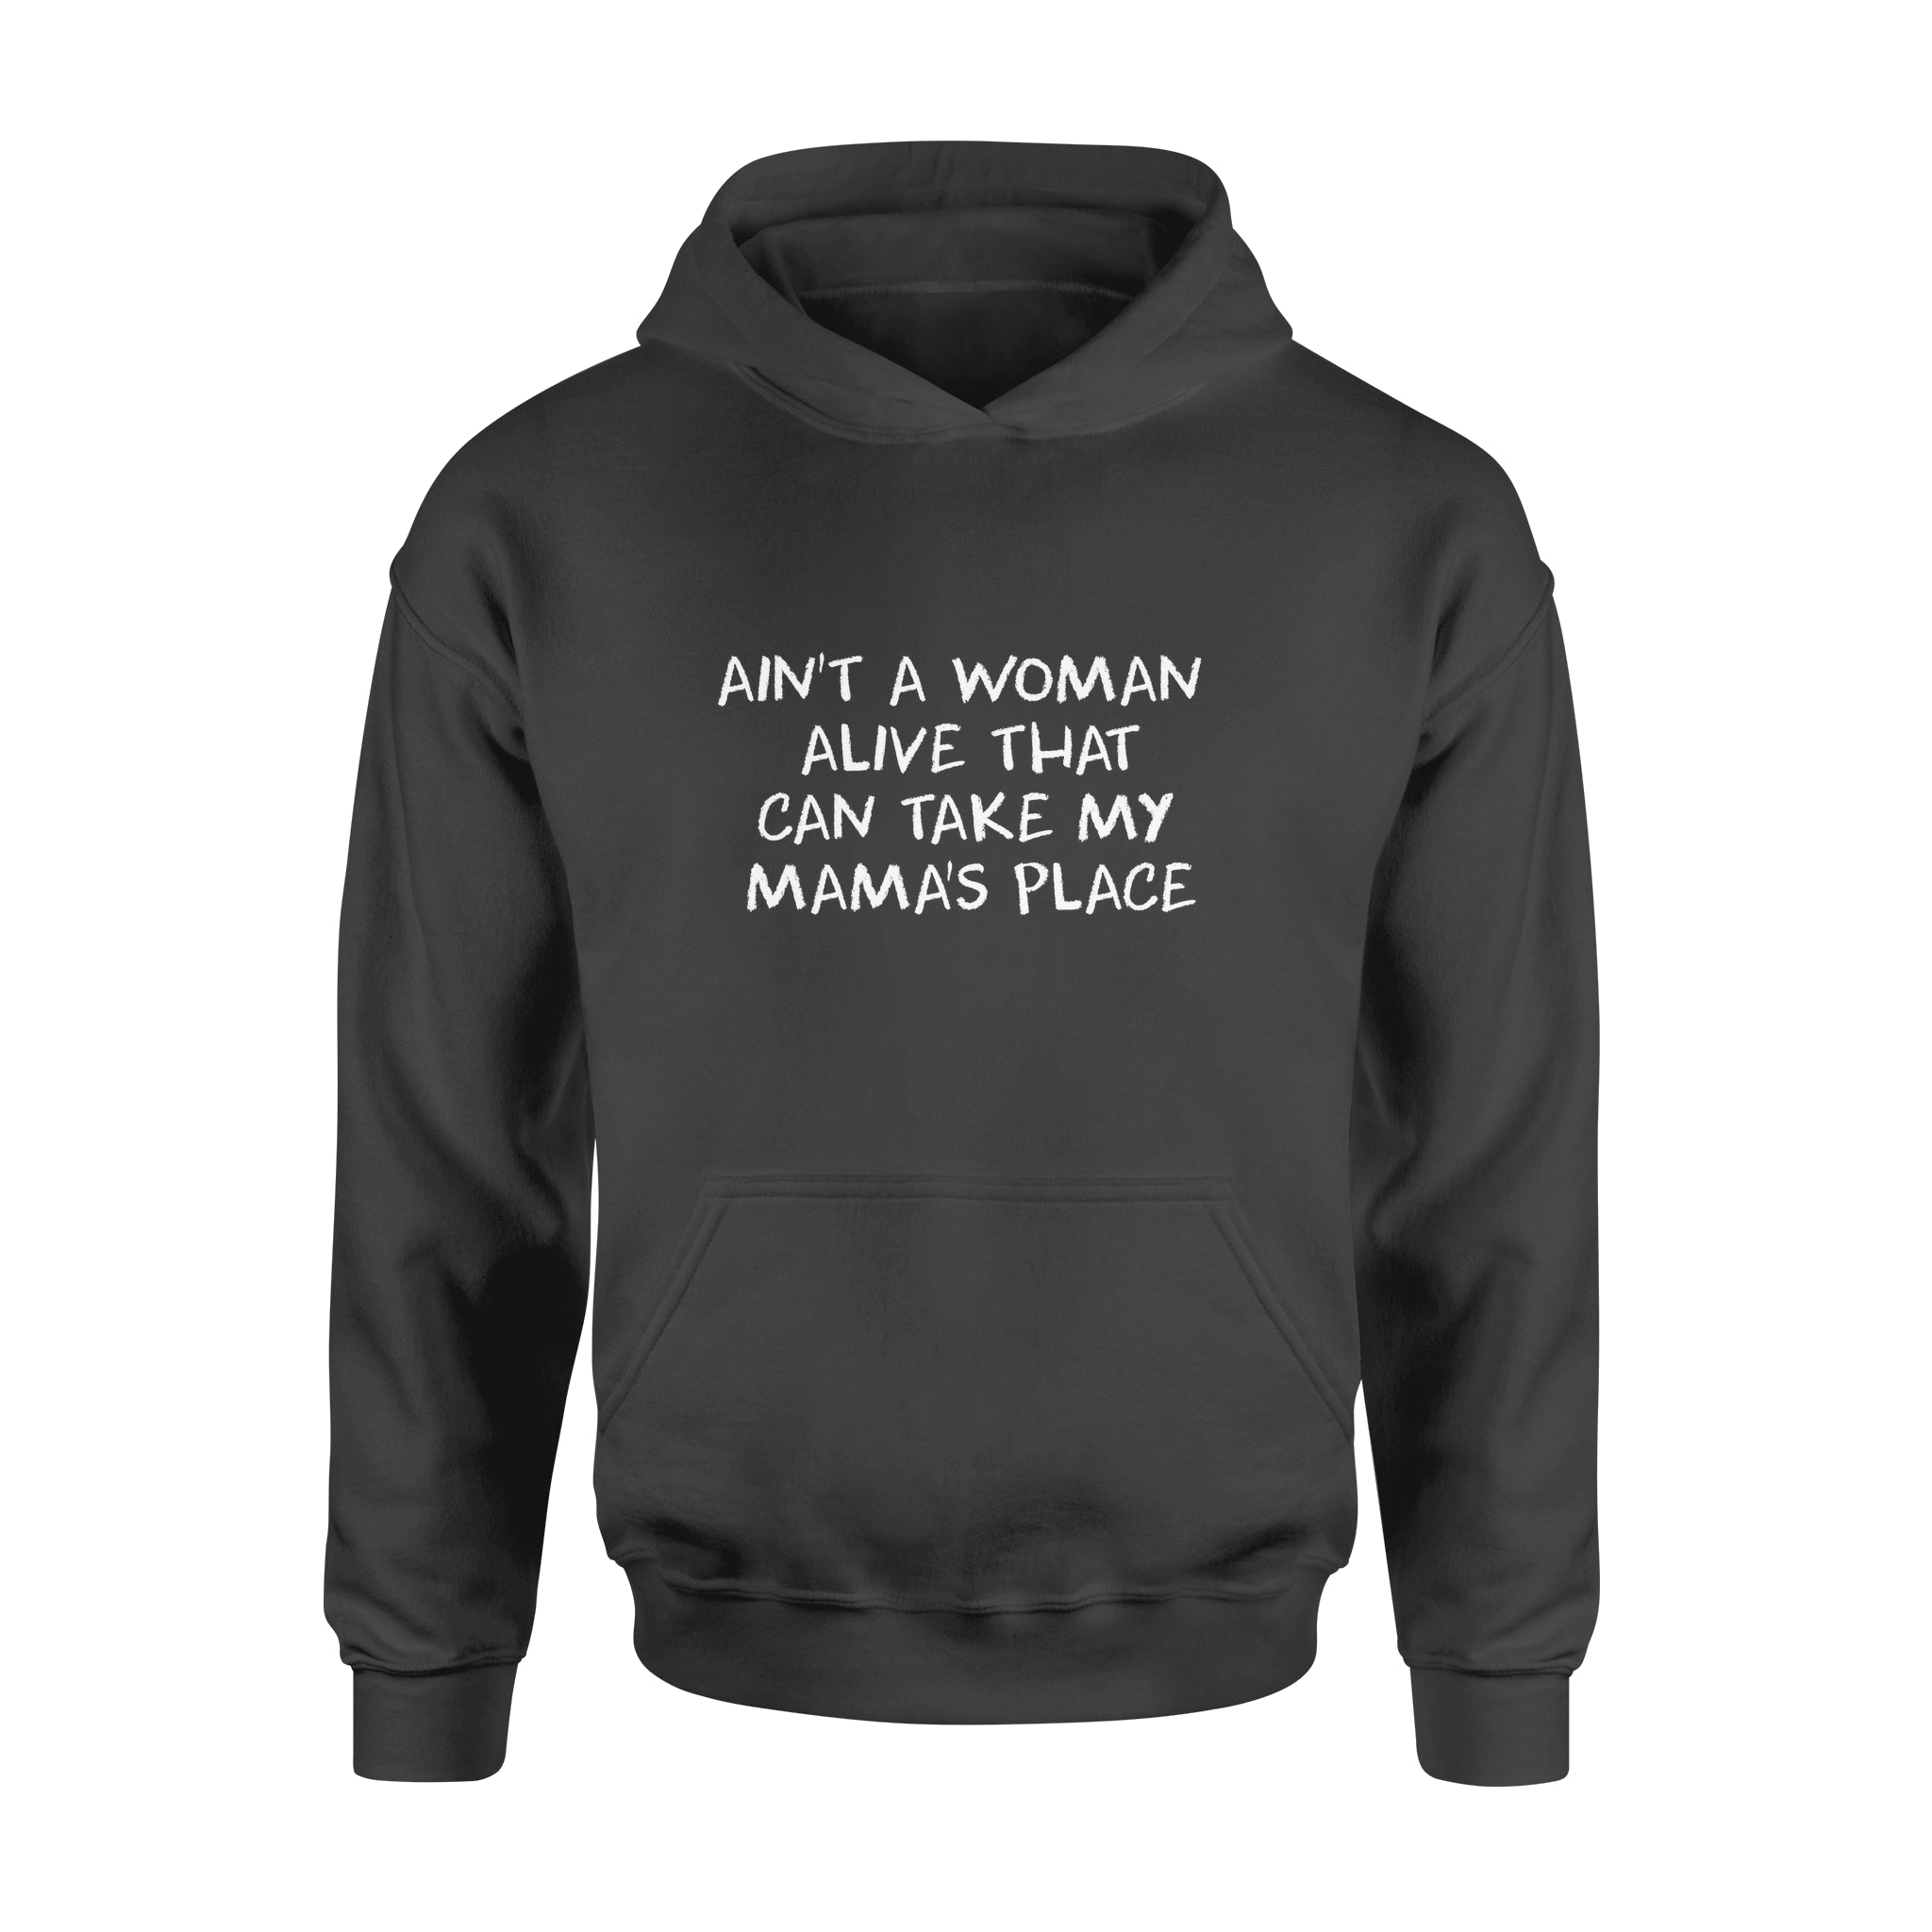 Ain't A Woman Alive That Can Take My Mama's Place hoodie